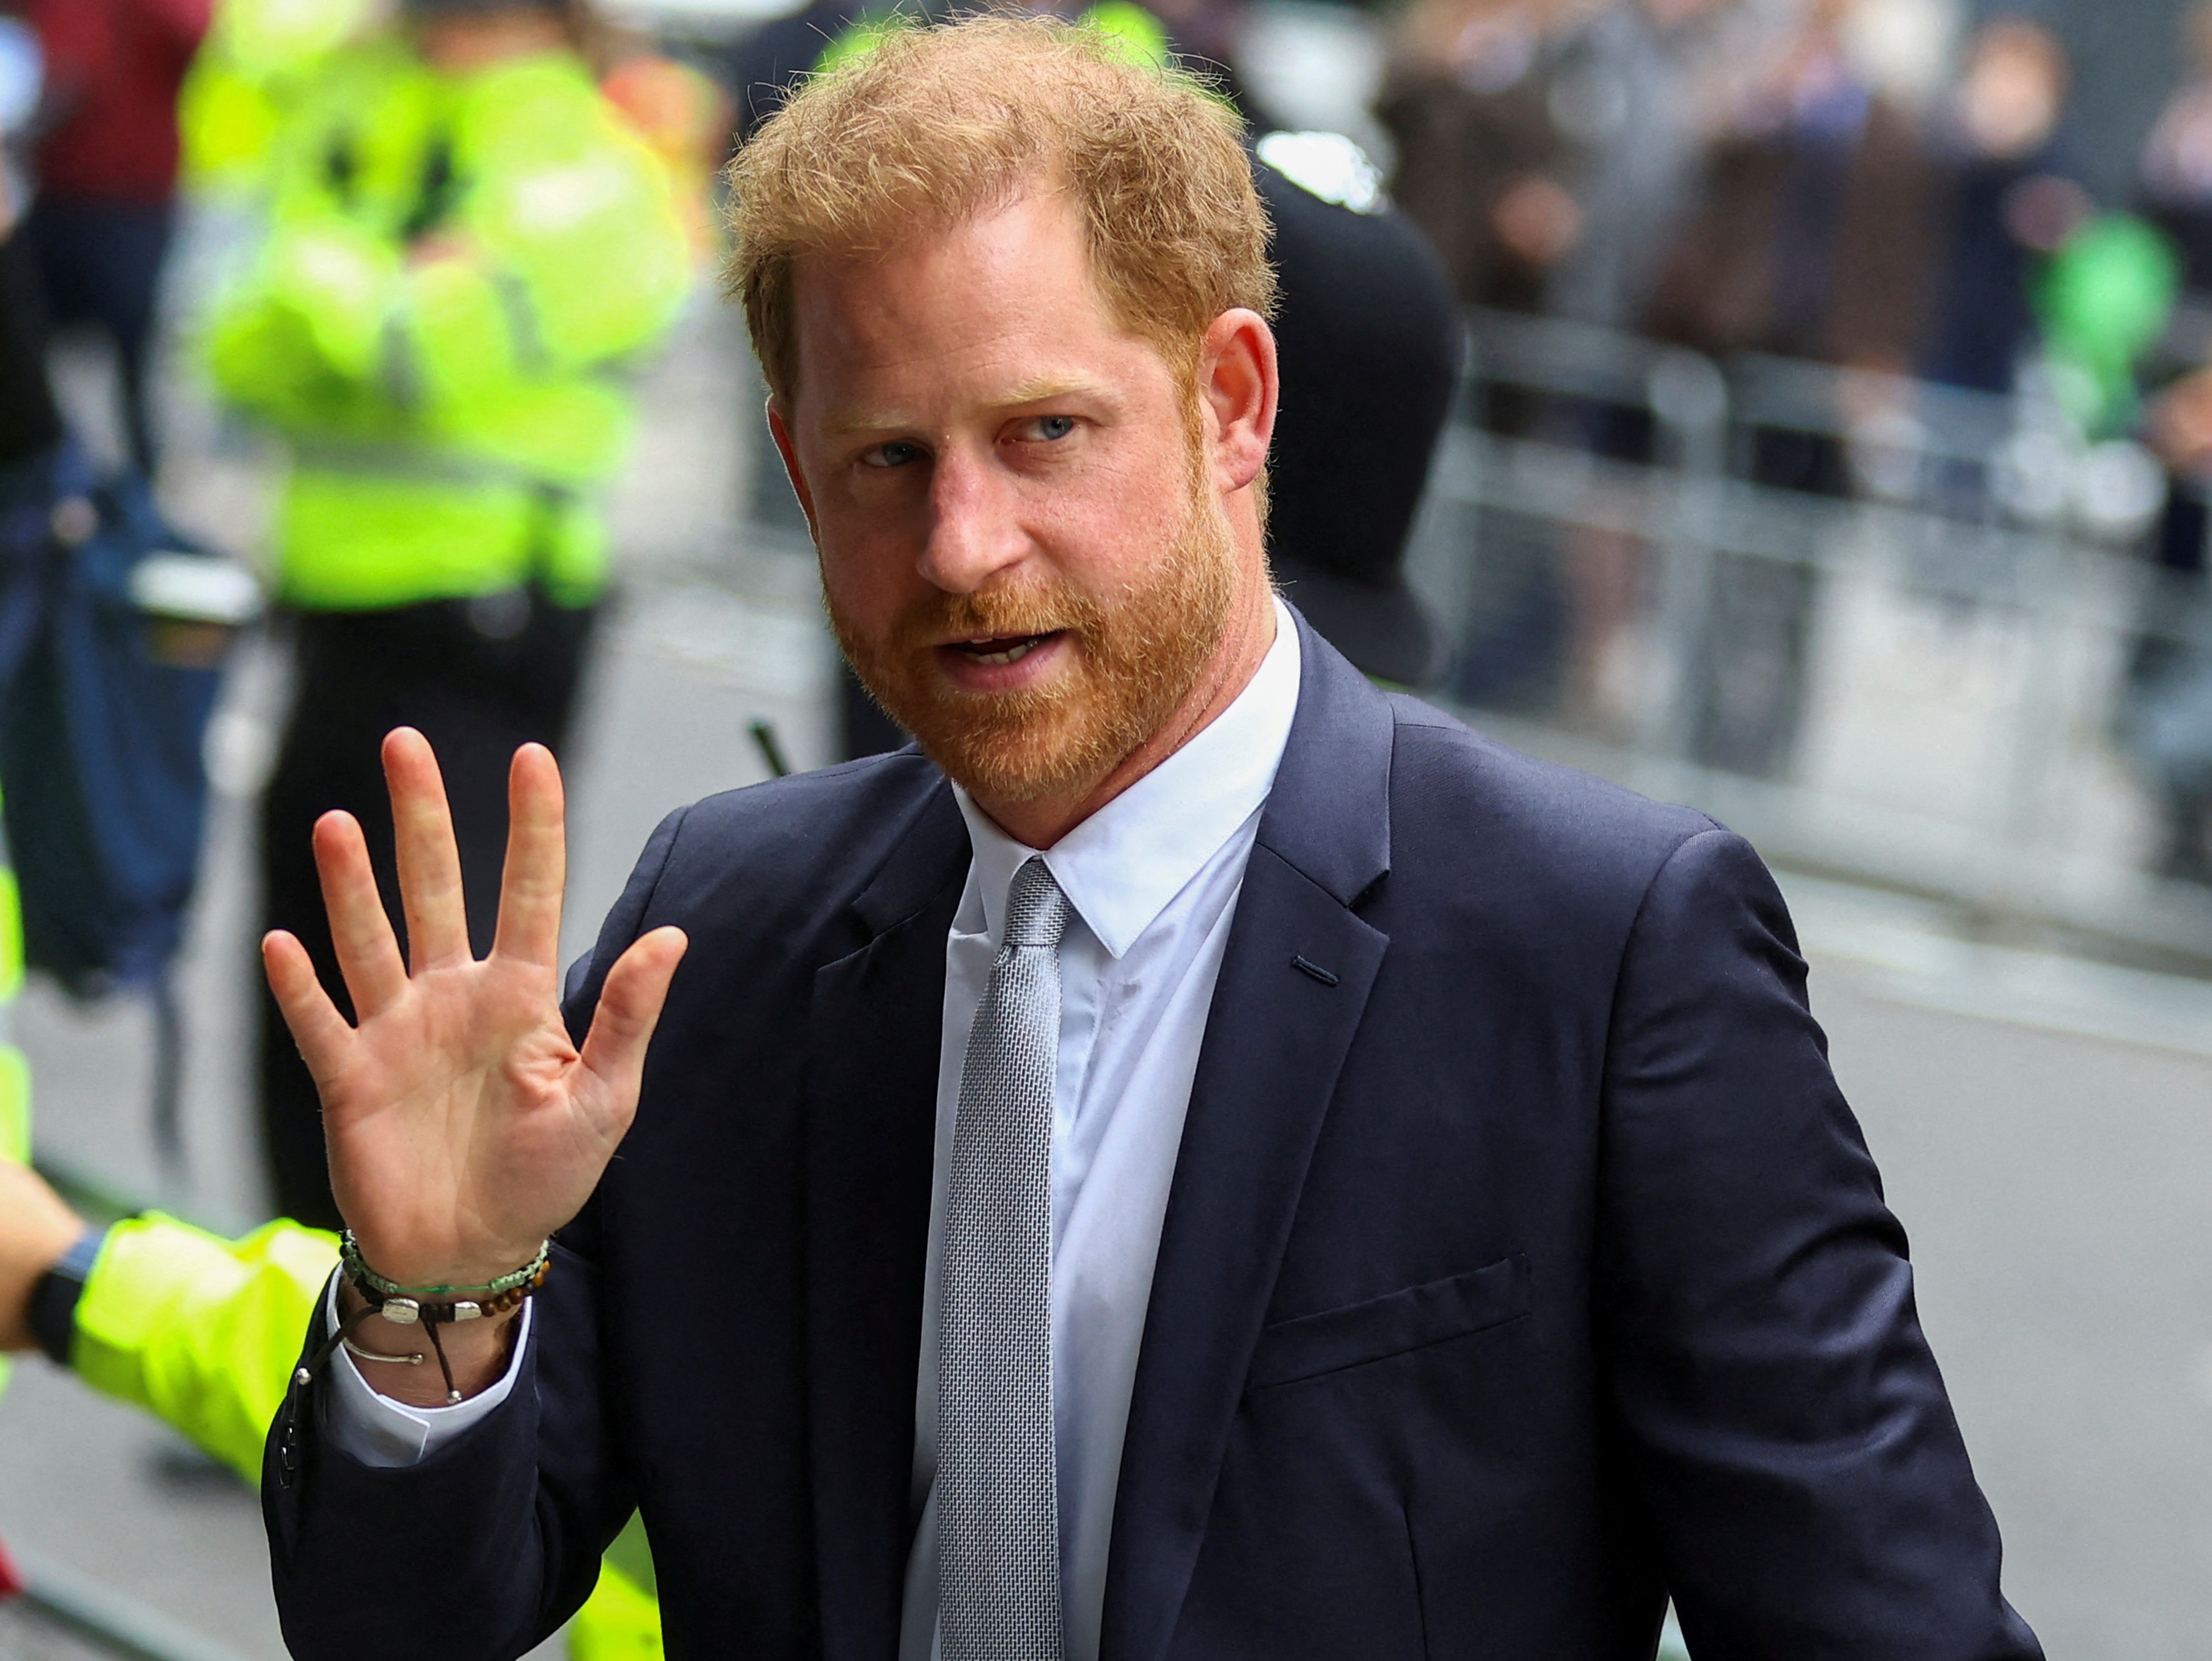 

<p>Prince Harry may have found out about his father through a news alert  </p>
<p>” height=”3508″ width=”4673″ layout=”responsive” i-amphtml-layout=”responsive”><i-amphtml-sizer slot=